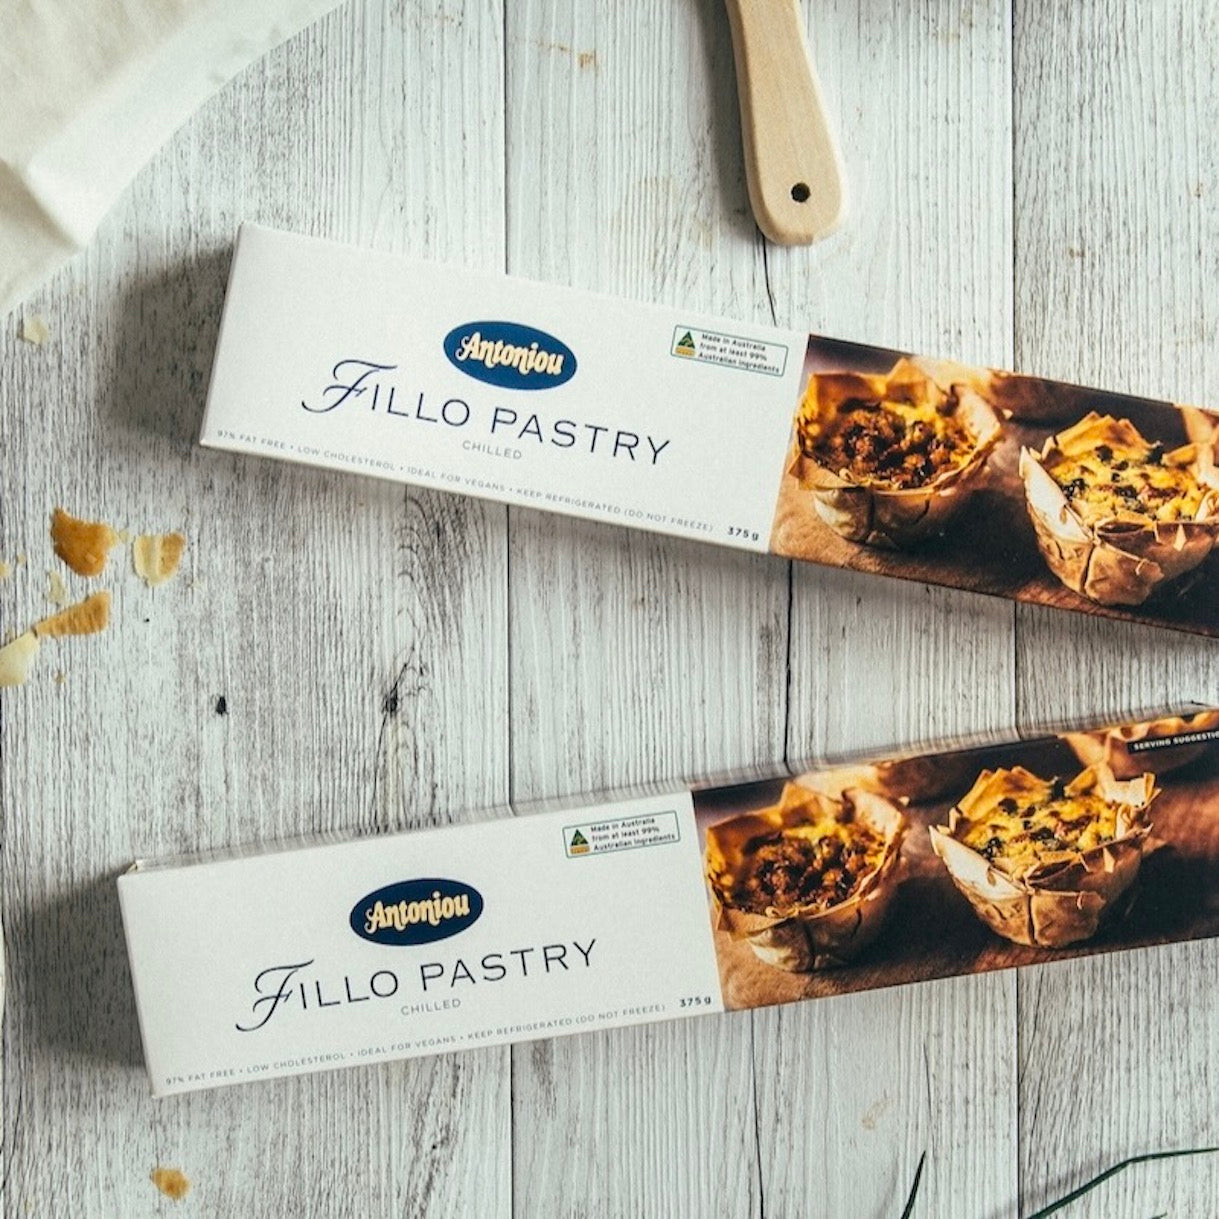 fillo-pastry-online-grocery-delivery-singapore-thenewgrocer